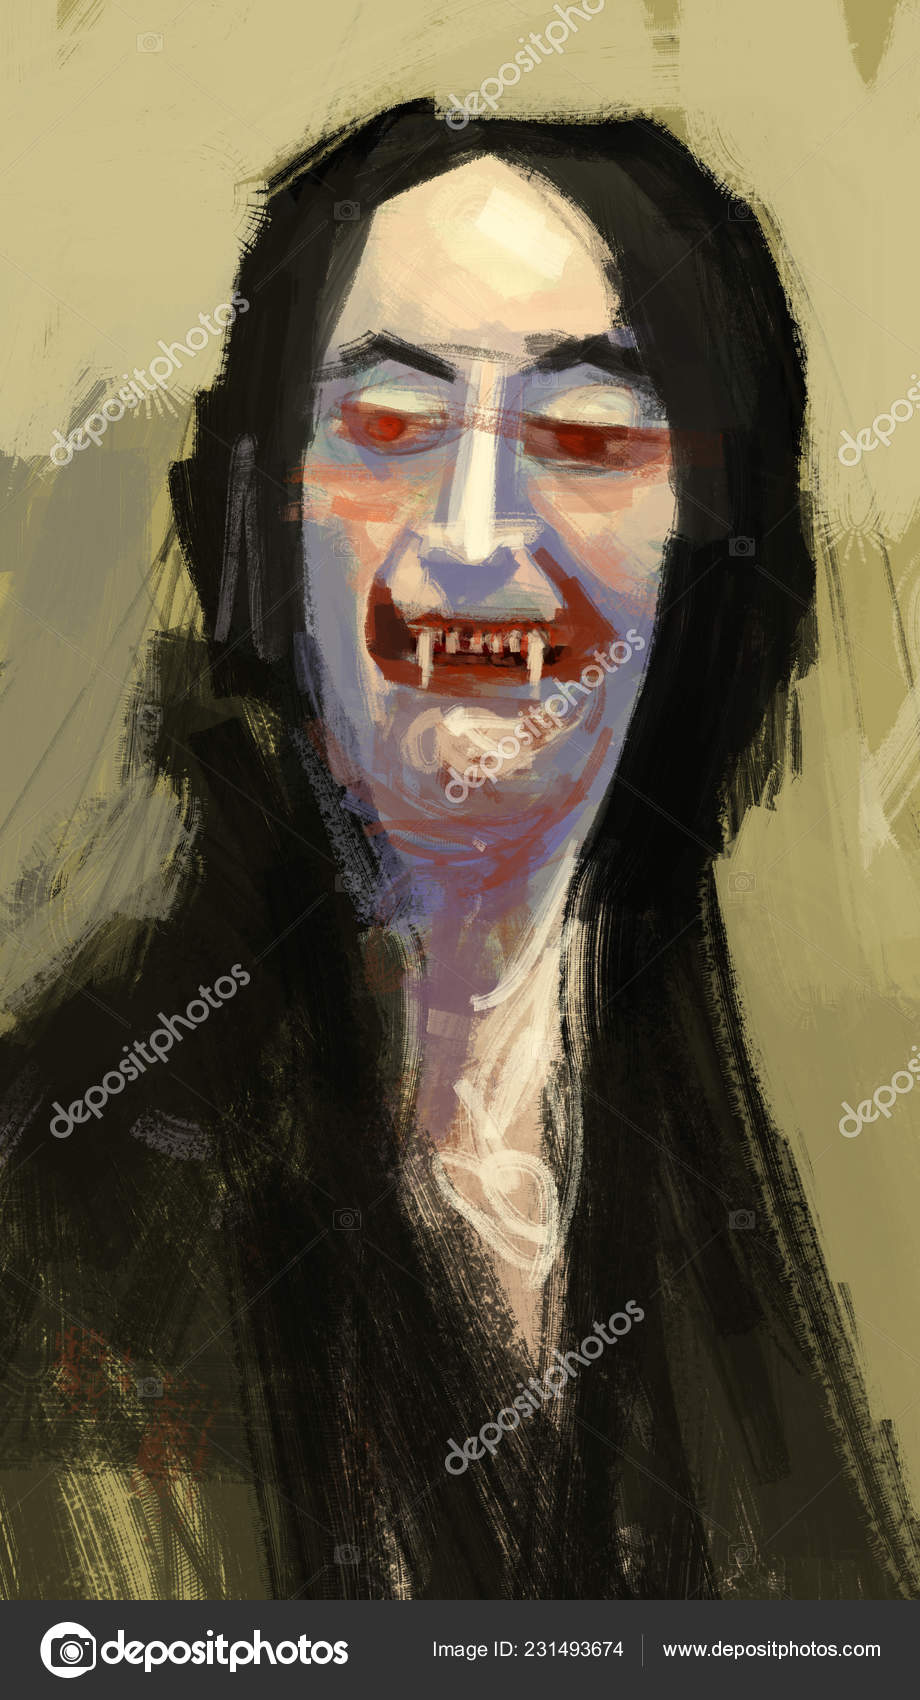 Painted Vampire Faces Painting Abstract Scary Vampire Head Brush Stroke Style Digital Illustration Stock Photo C Christianmullerart 231493674